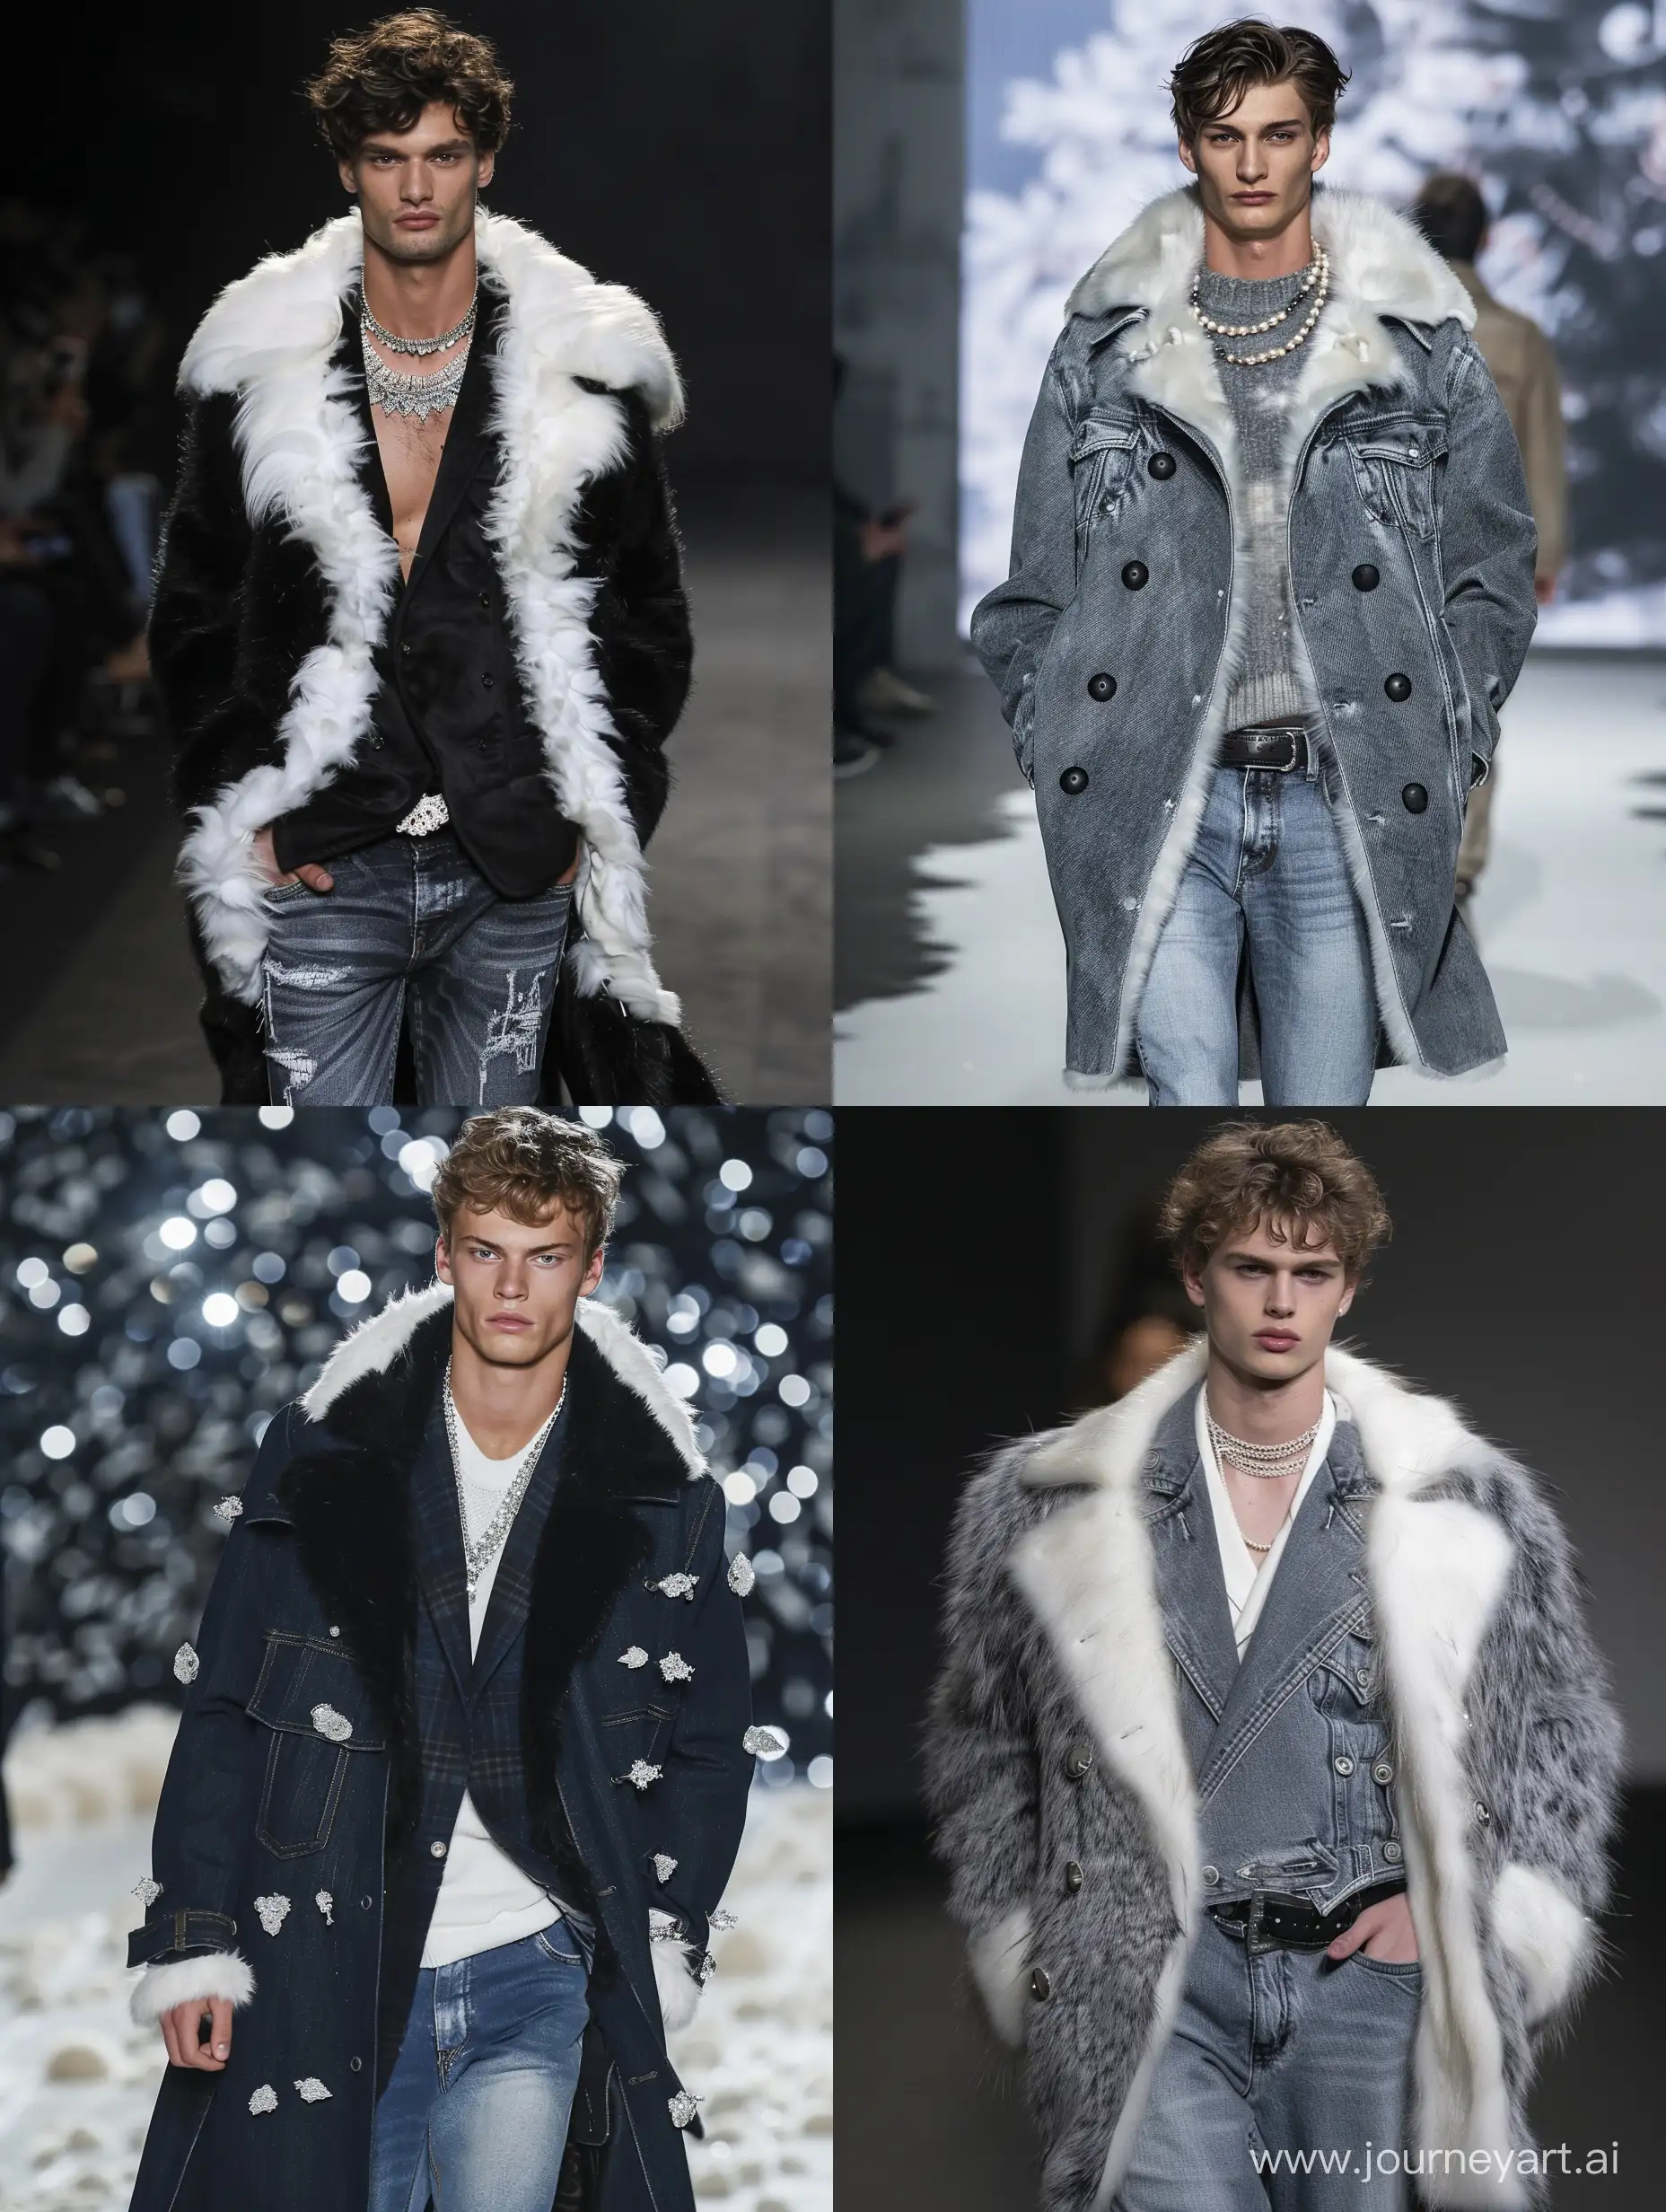 Handsome-Male-Model-in-Slim-Runway-Jeans-and-Vison-Mink-Coat-with-White-Jewelry